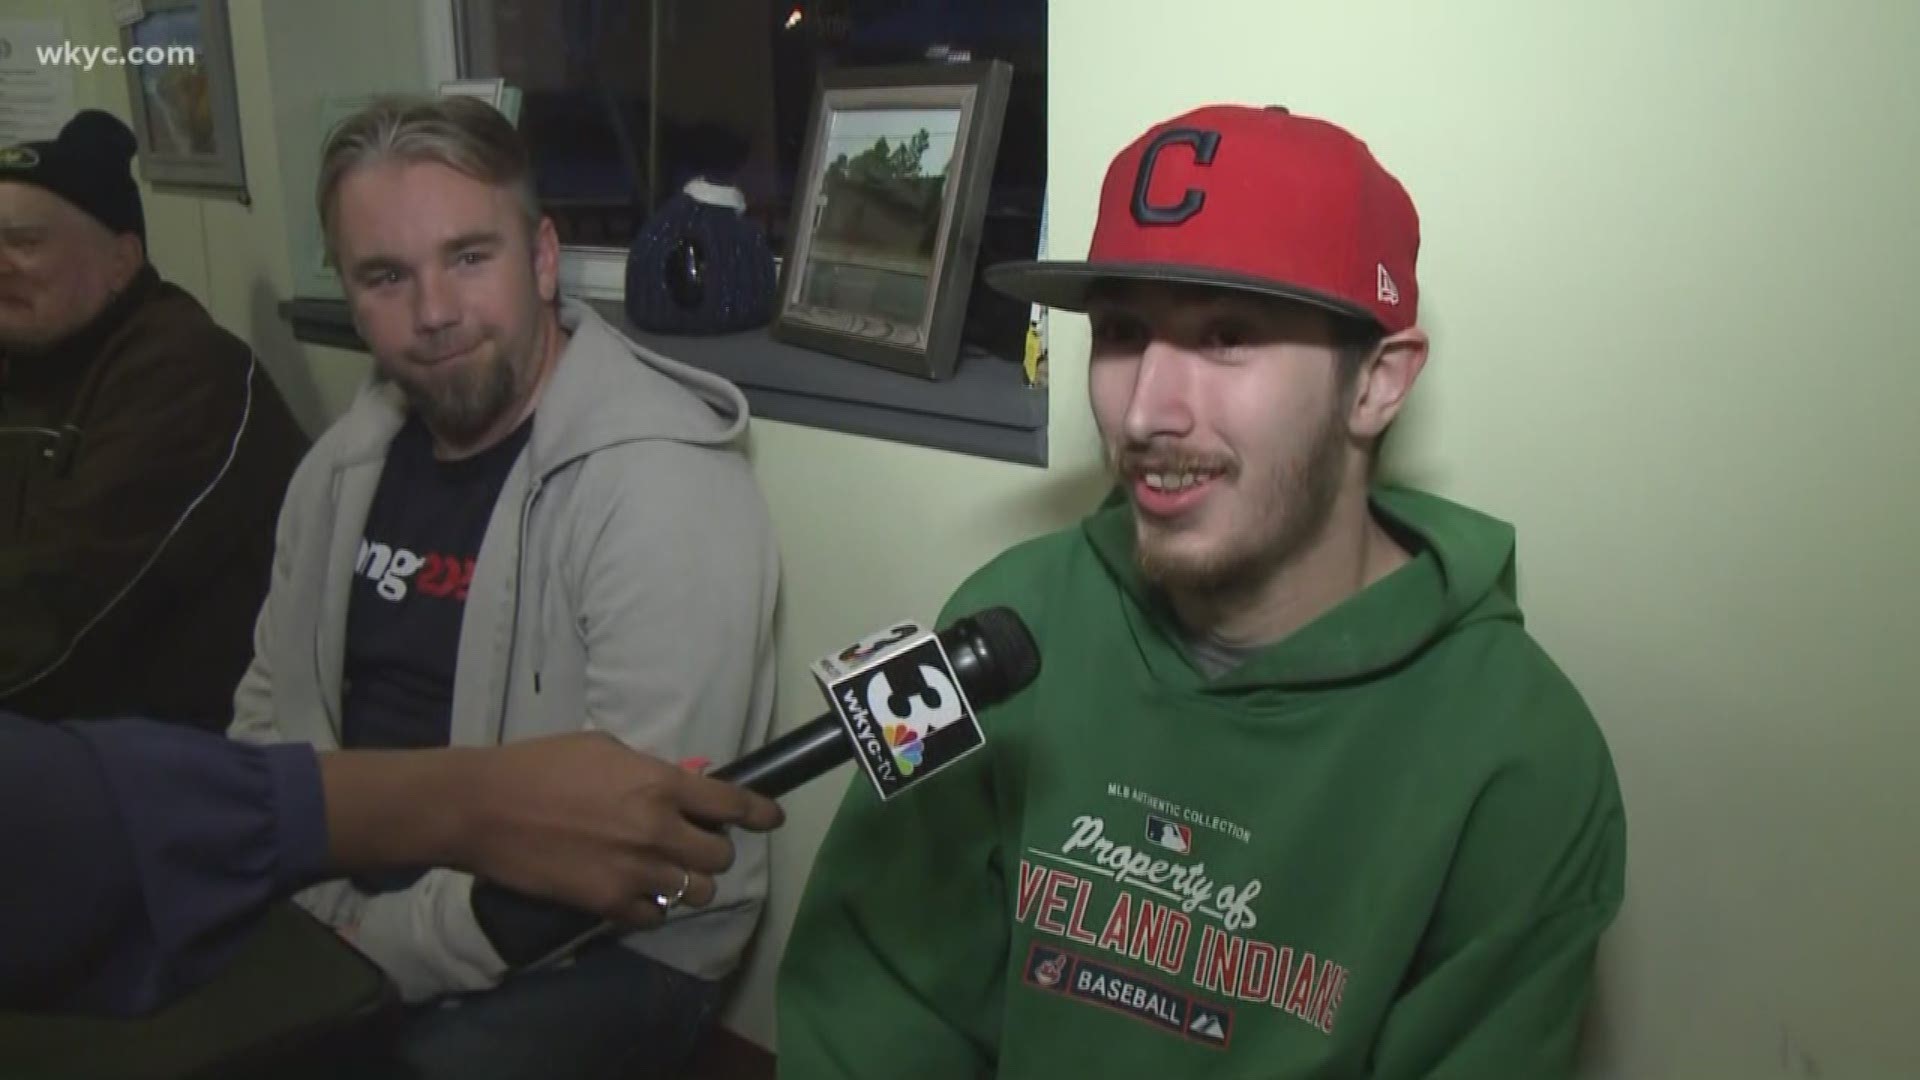 April 1, 2019: It was a special surprise for a Cleveland Indians fan this morning when we gave him two free tickets to attend today's home opener after singing 'Take Me Out To The Ballgame' on live TV.